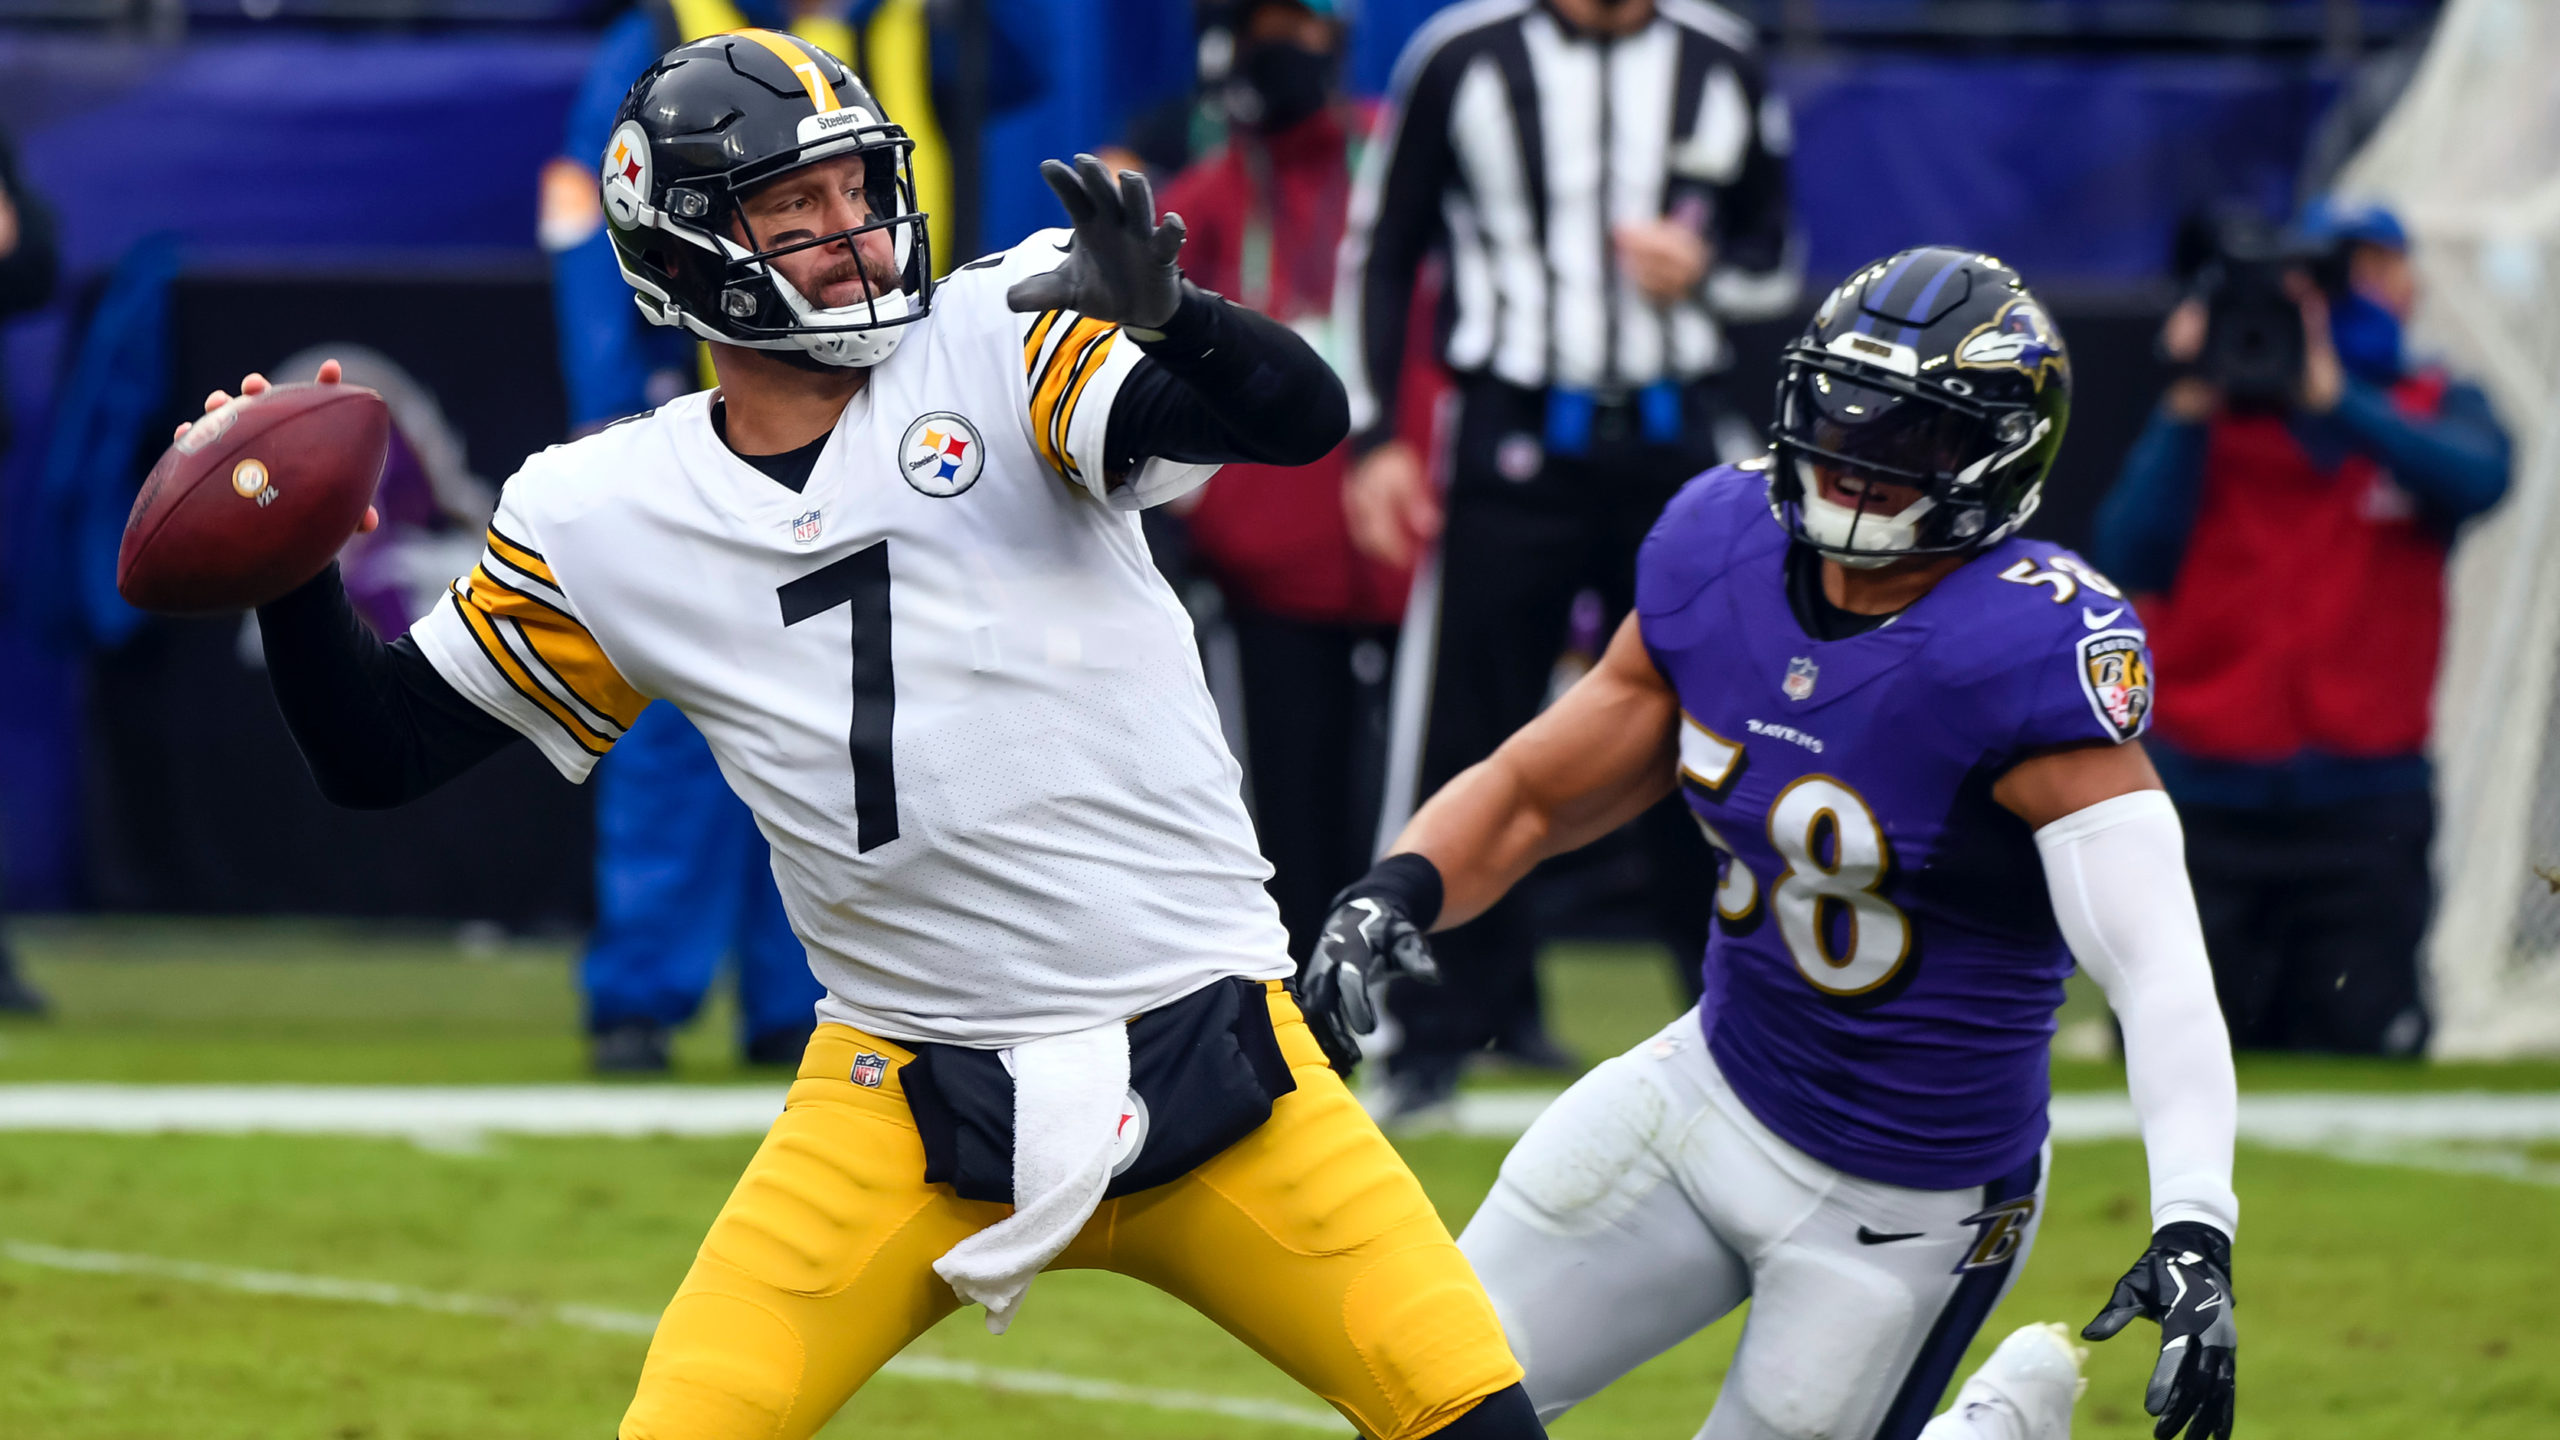 Steelers vs. Ravens Odds & Promos: Bet $1, Win $100 if There’s at Least 1 Touchdown article feature image